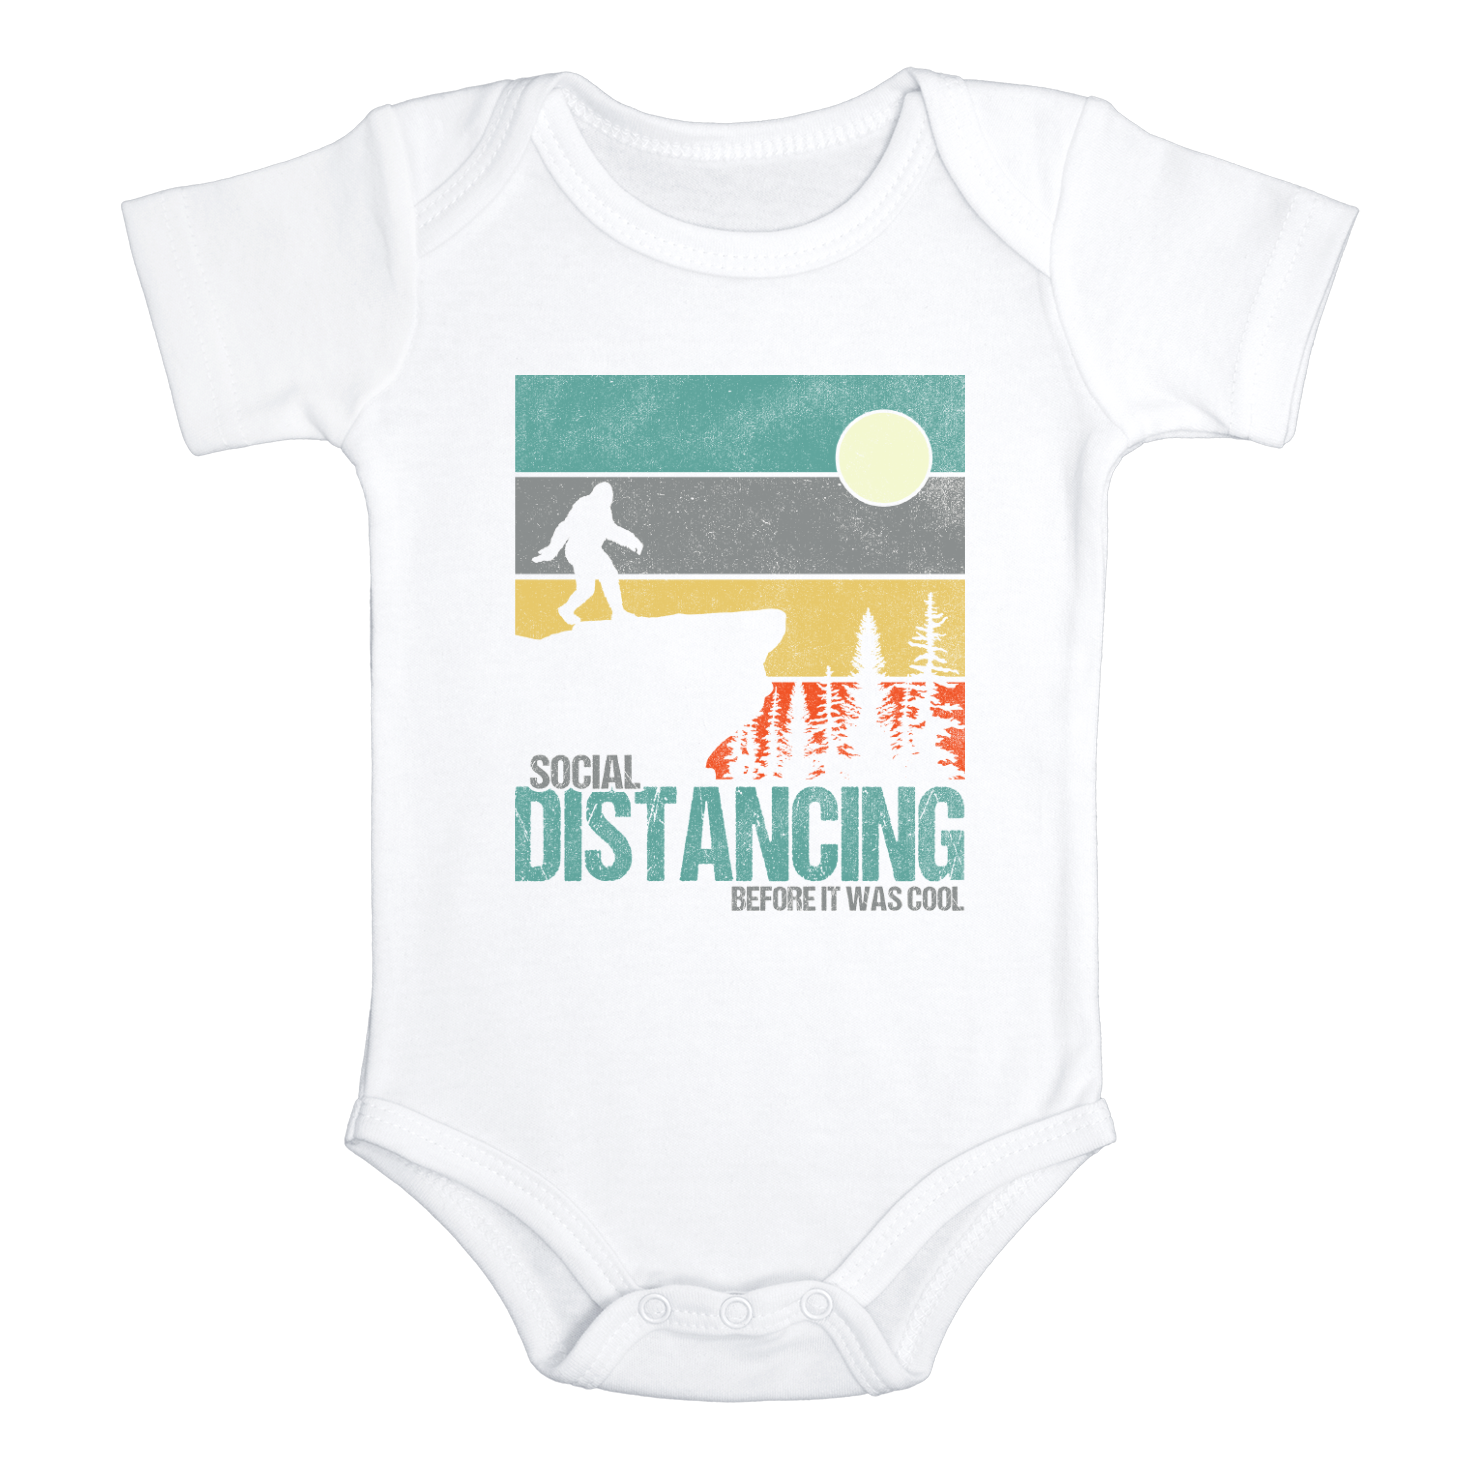 SOCIAL DISTANCING BEFORE IT WAS COOL Funny baby onesies Big Foot bodysuit (white: short or long sleeve)